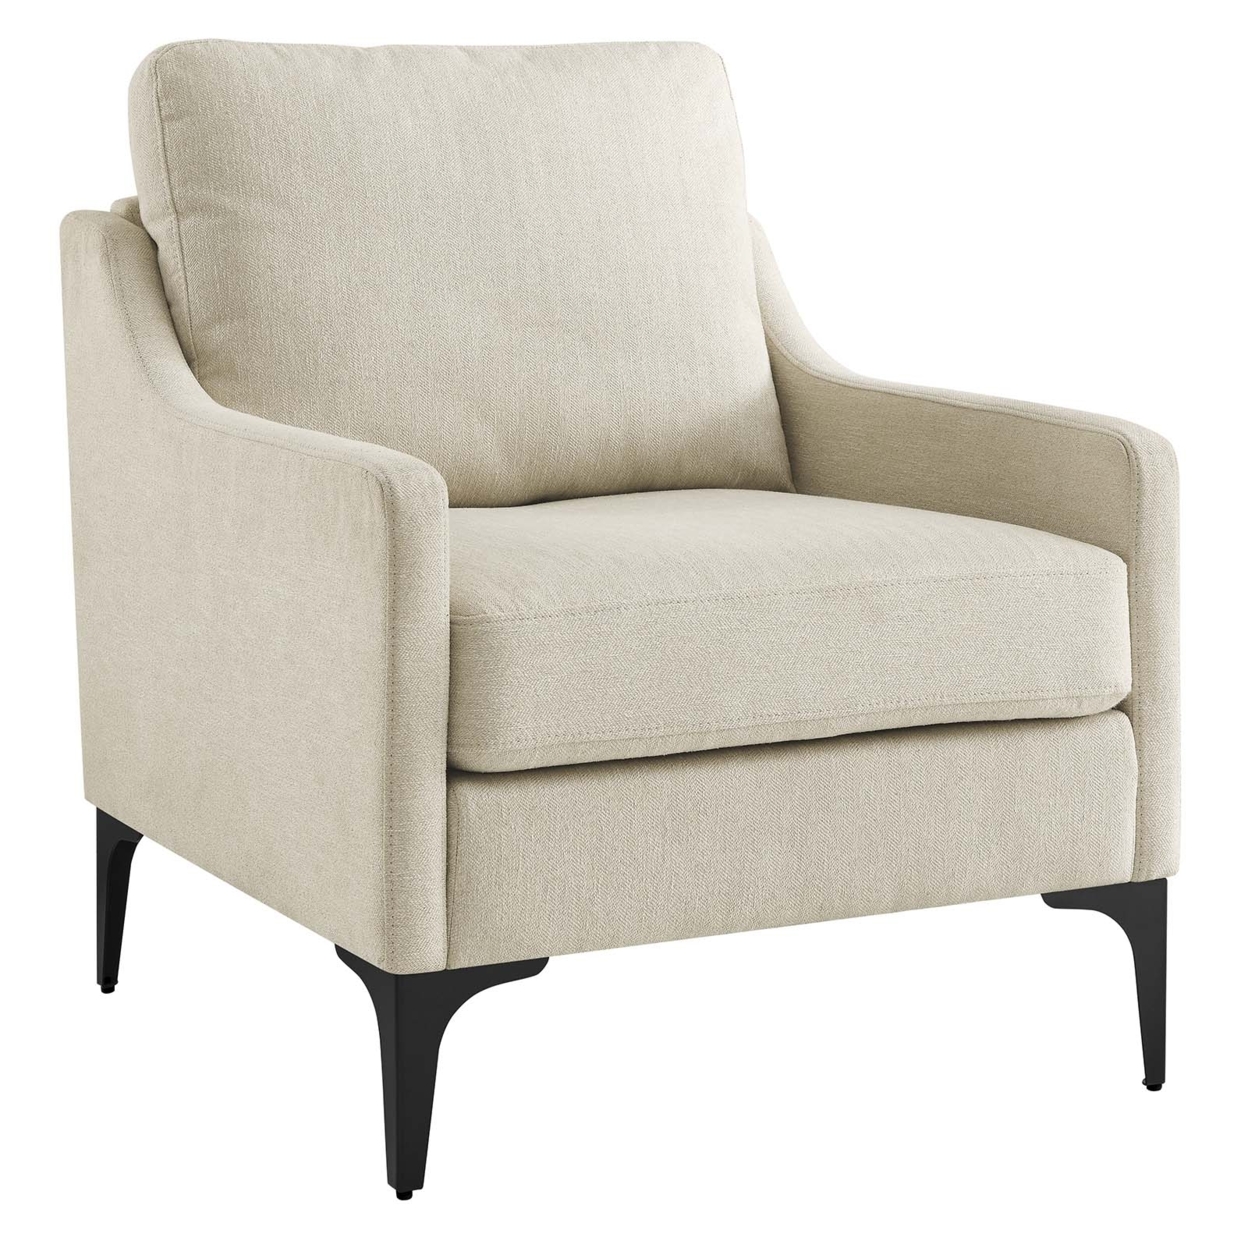 Corland Upholstered Fabric Armchair, Beige